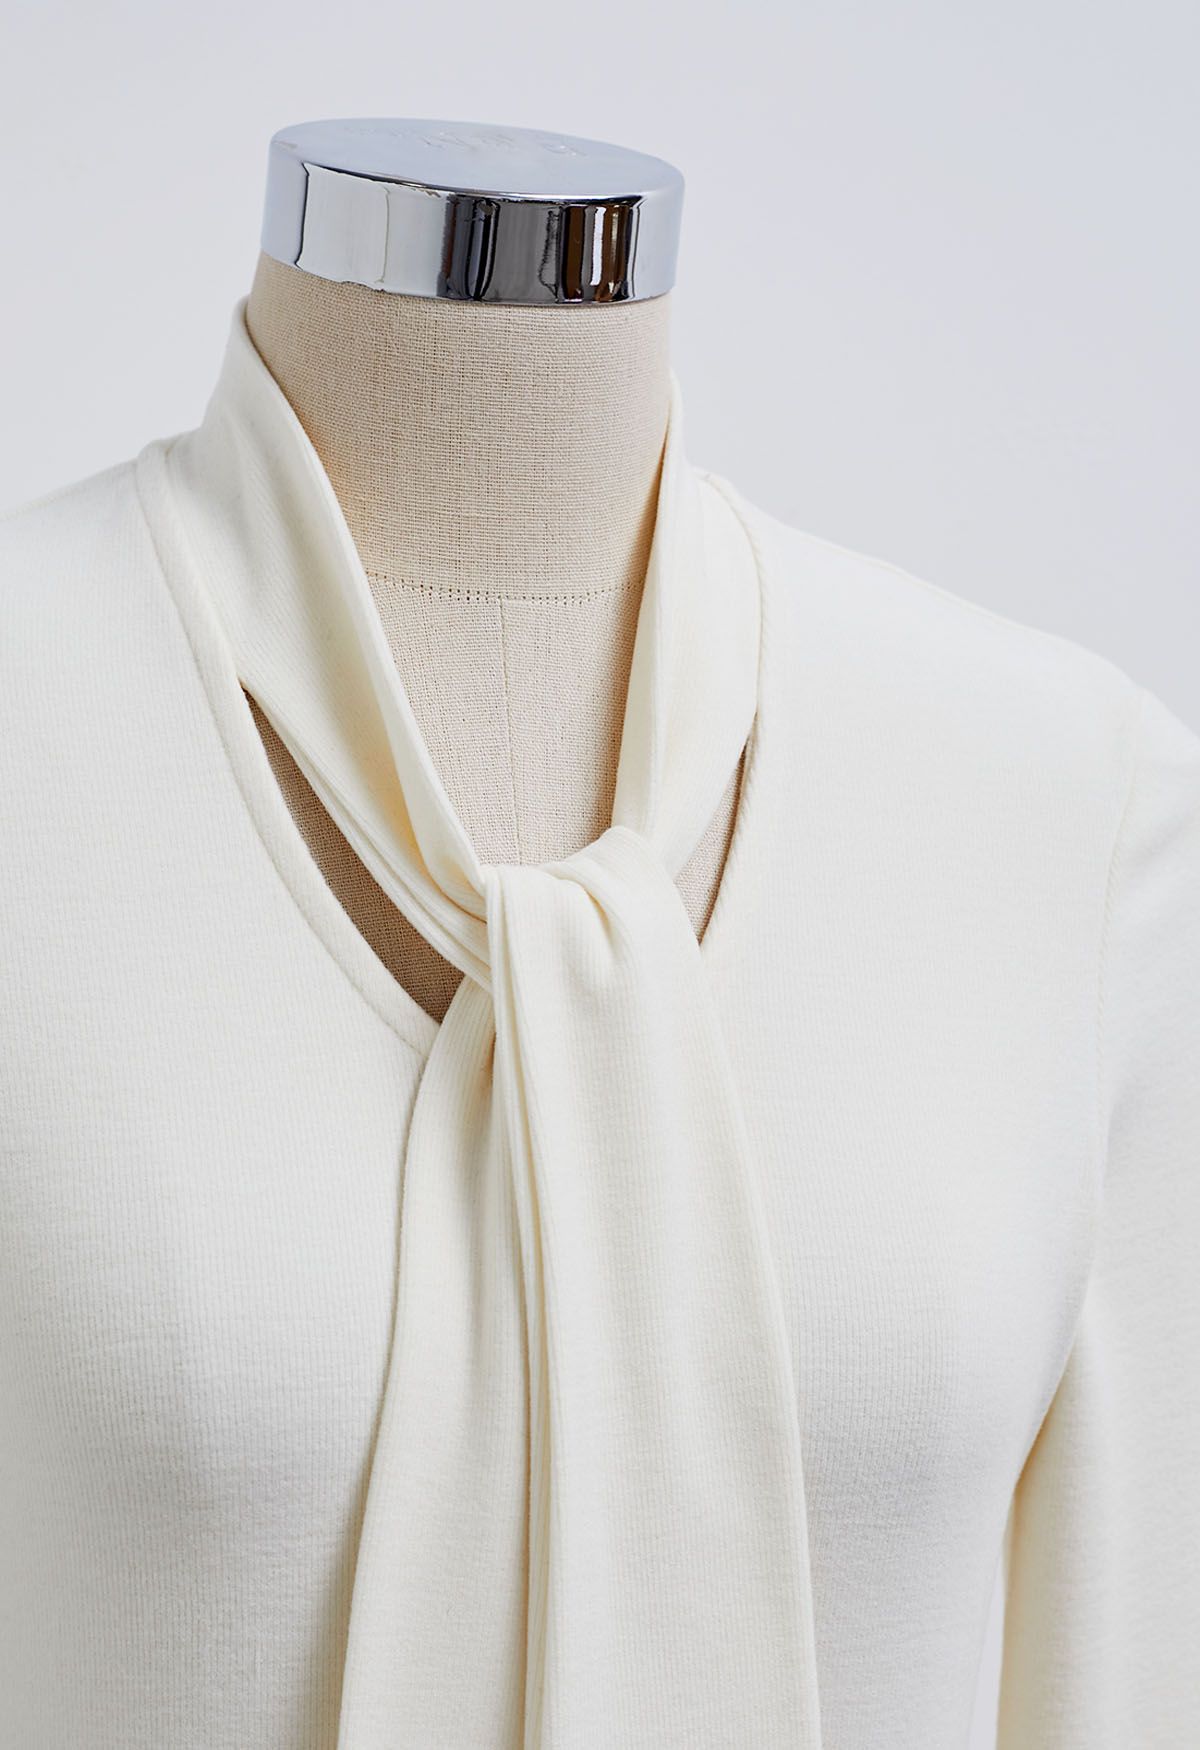 Chic Tie-Neck Soft Top in Ivory